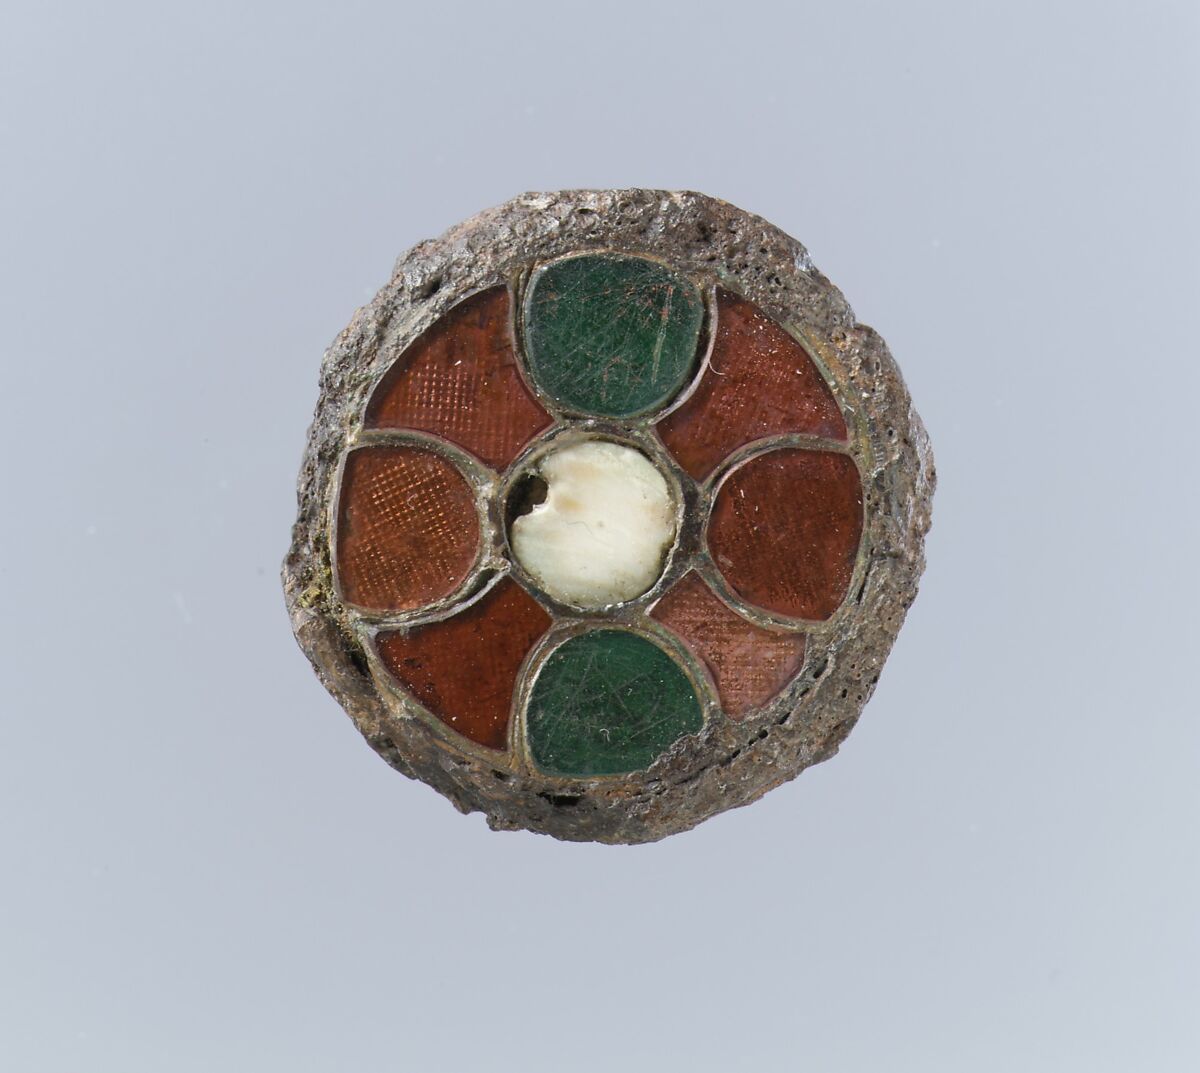 Disk Brooch, Copper alloy, garnets, green glass, with patterned foil backings..., Frankish 